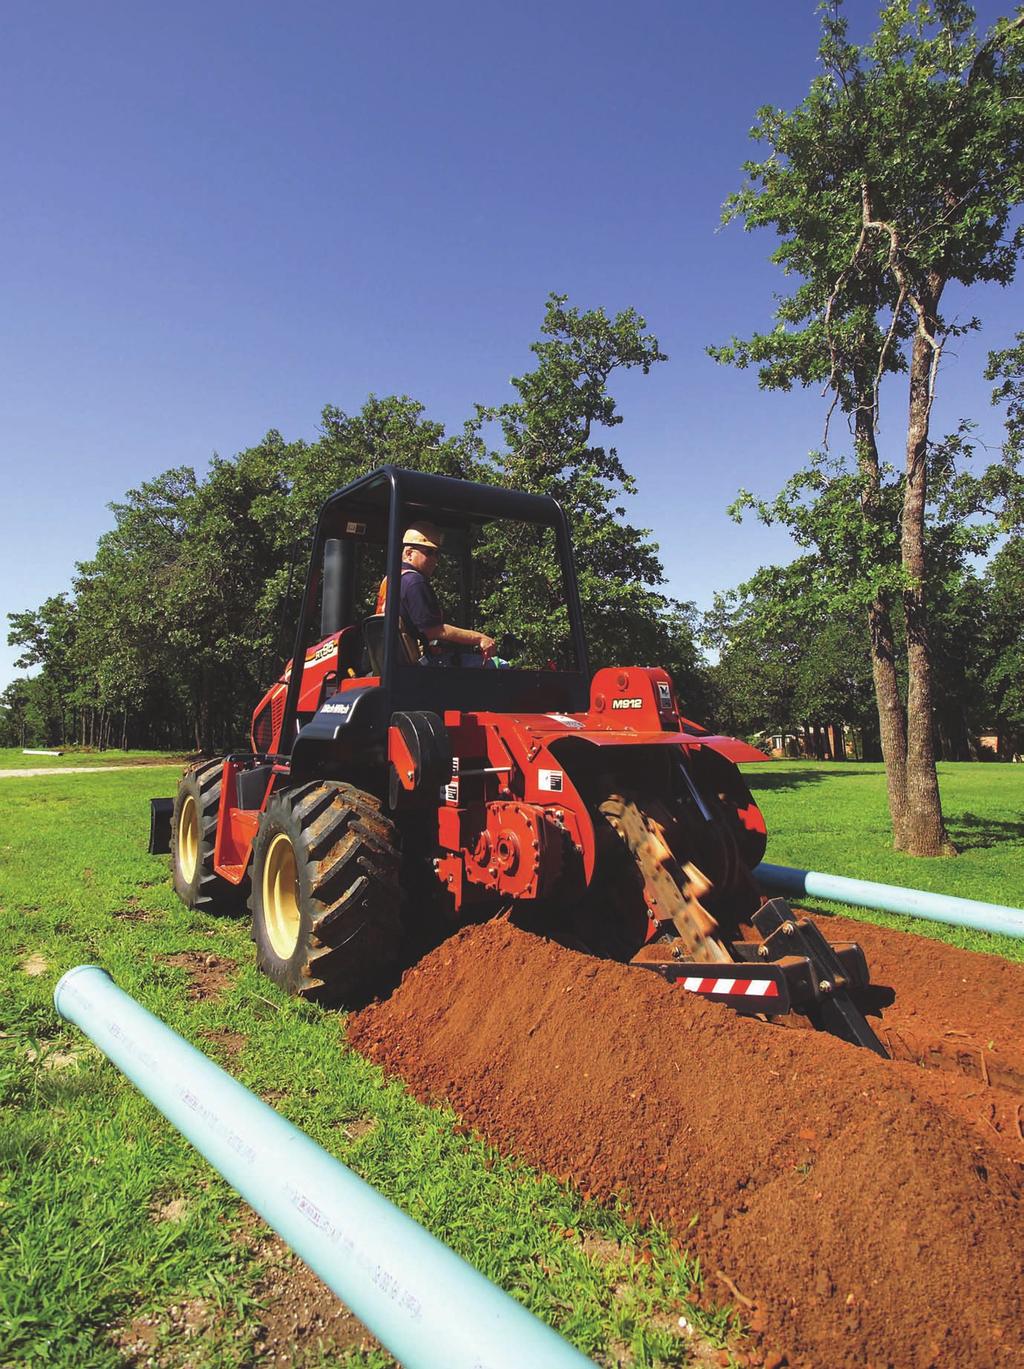 DITCH WITCH RT95, RT75 HEAVY DUTY TRACTORS Depending on the size of your jobsite, the Ditch Witch RT95 and RT75 have the power and maneuverability to accomplish any task.